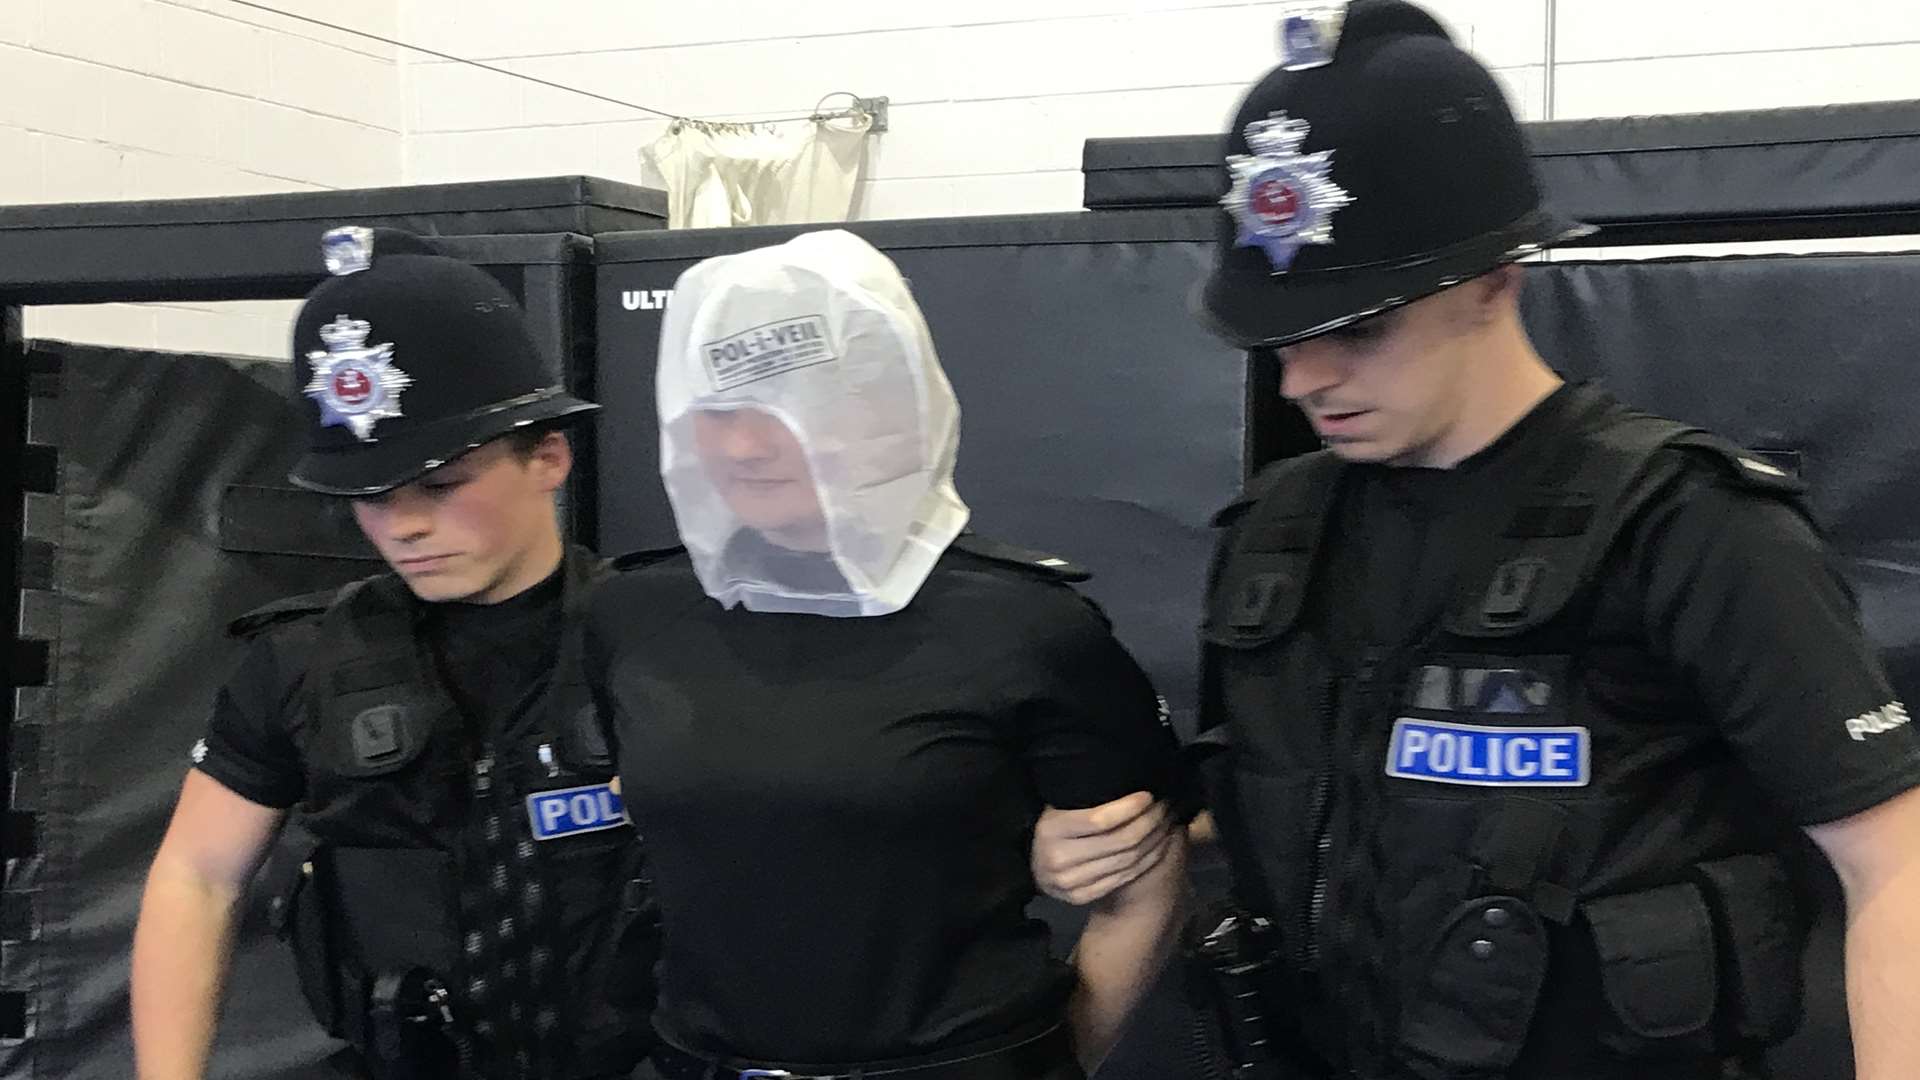 Police will be given spit hoods as an additional piece of protection